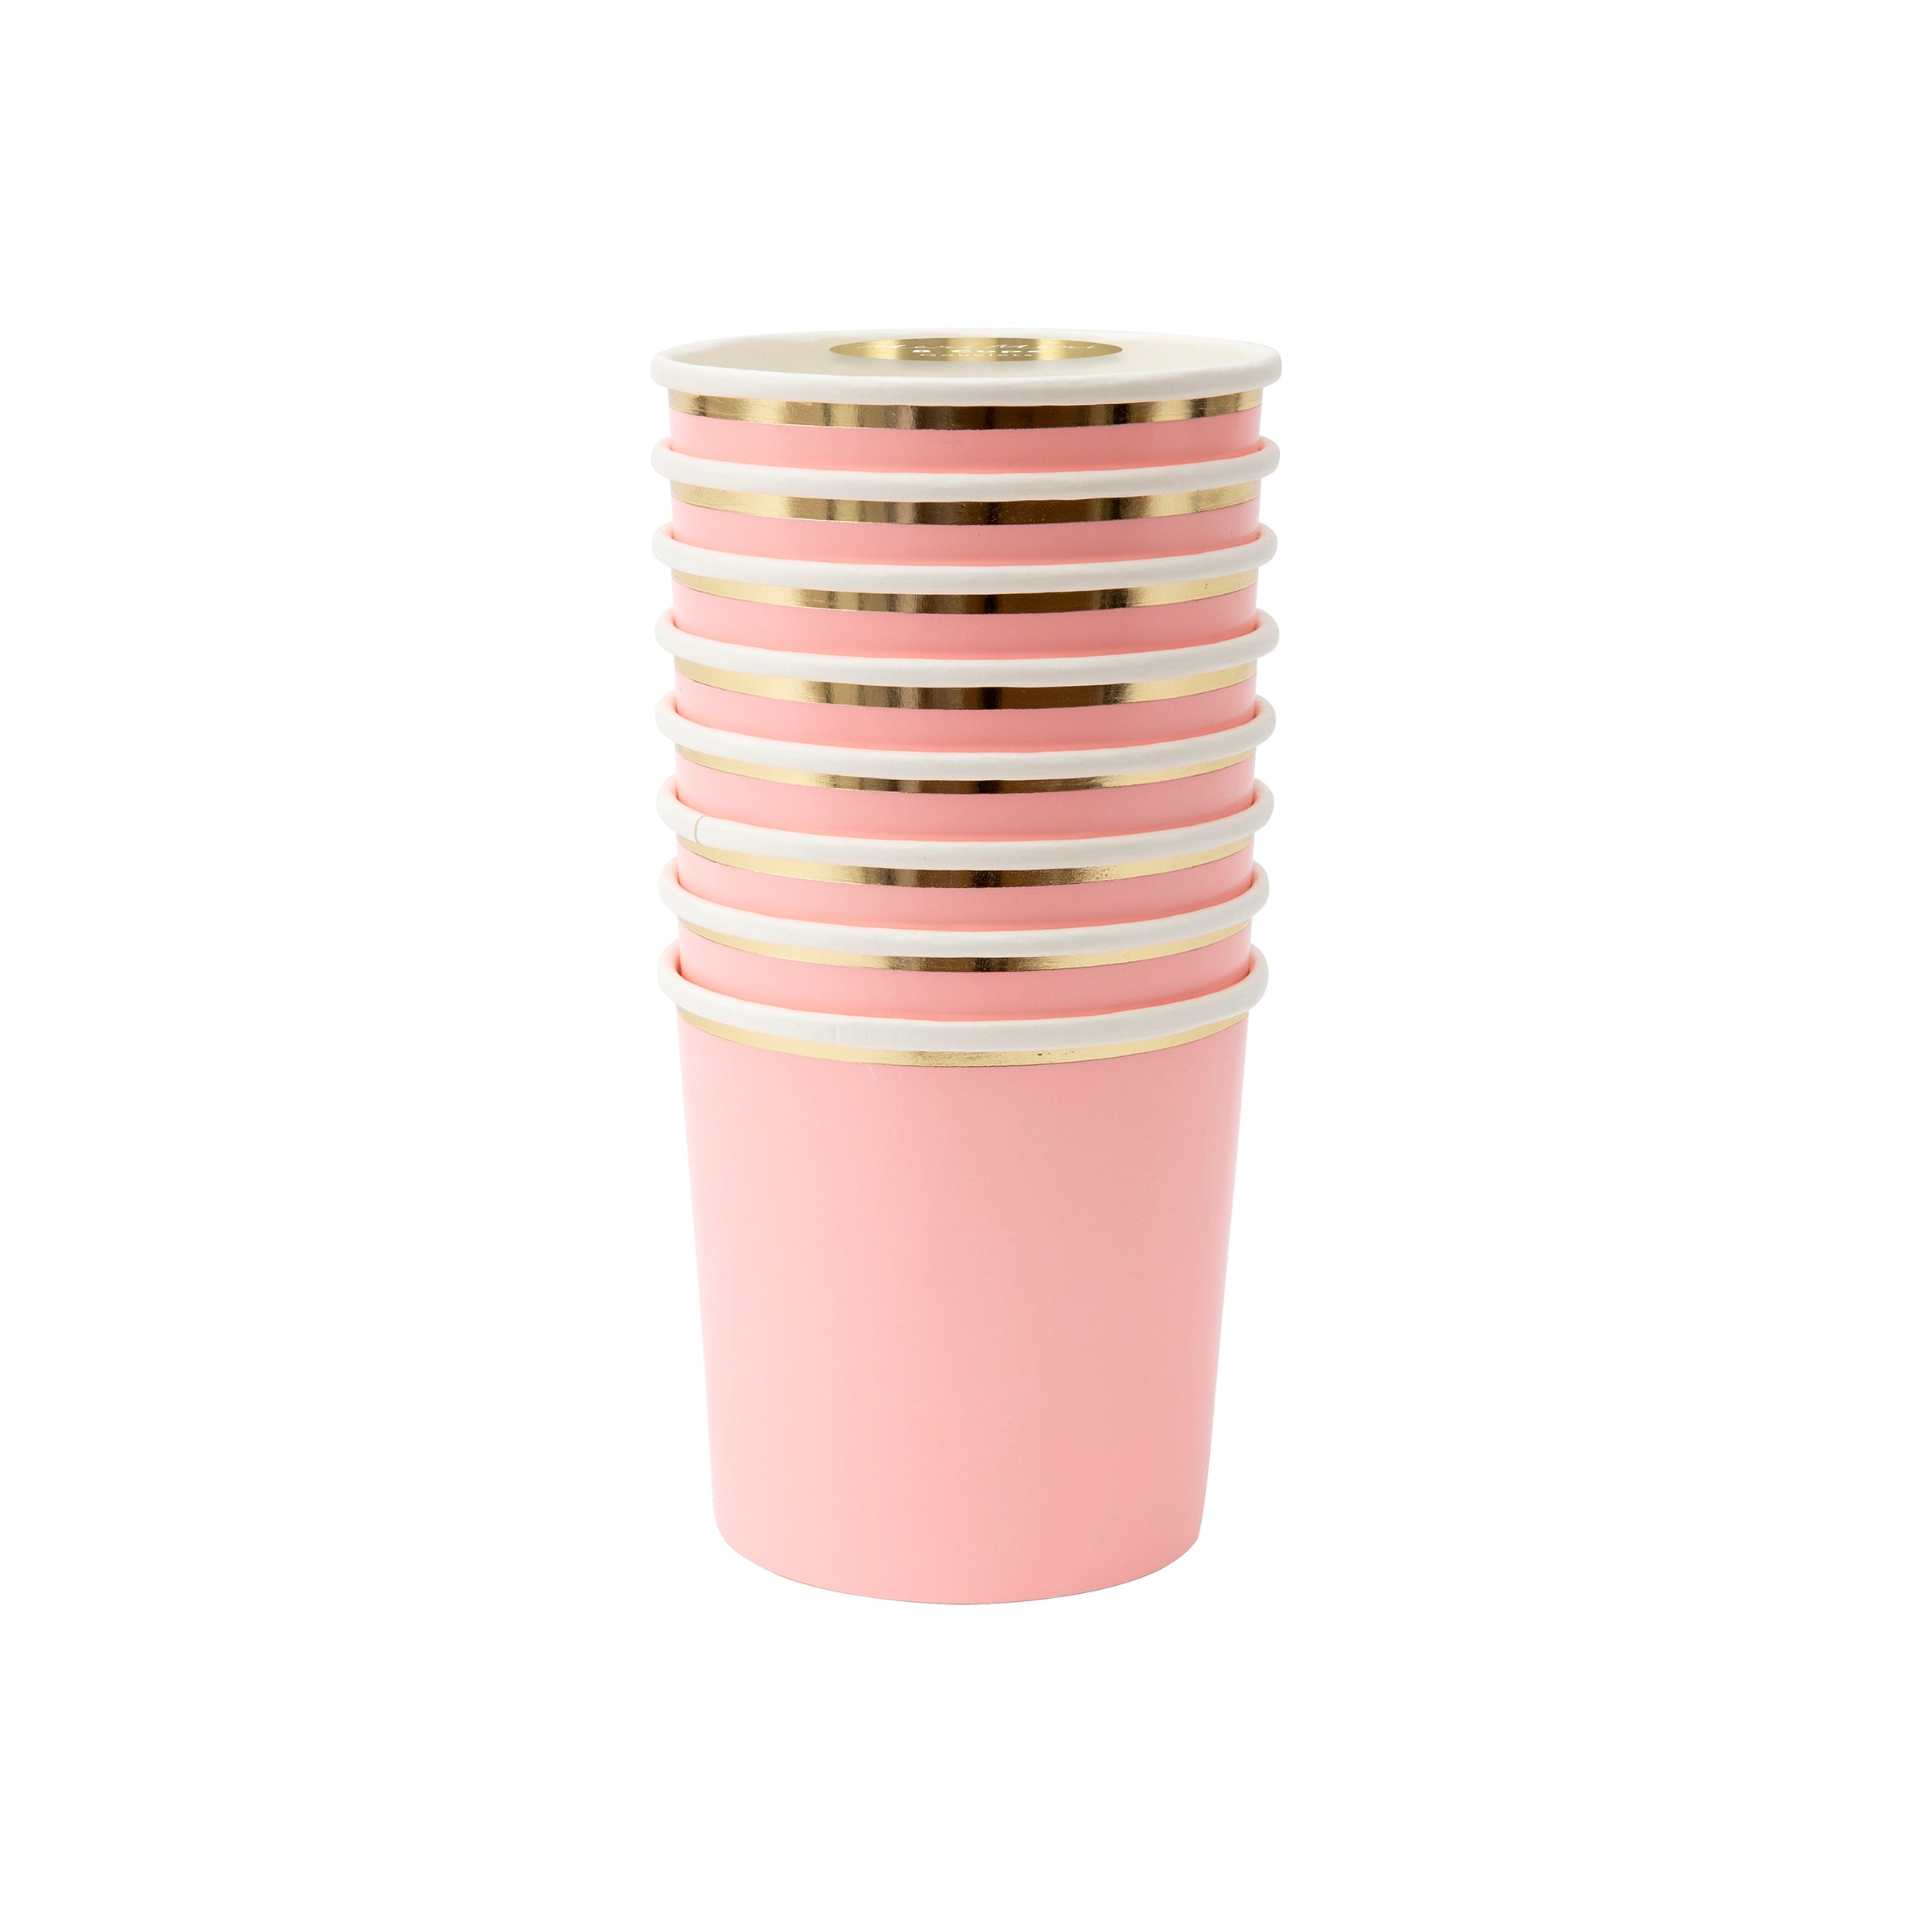 Neon Coral Tumbler Cups